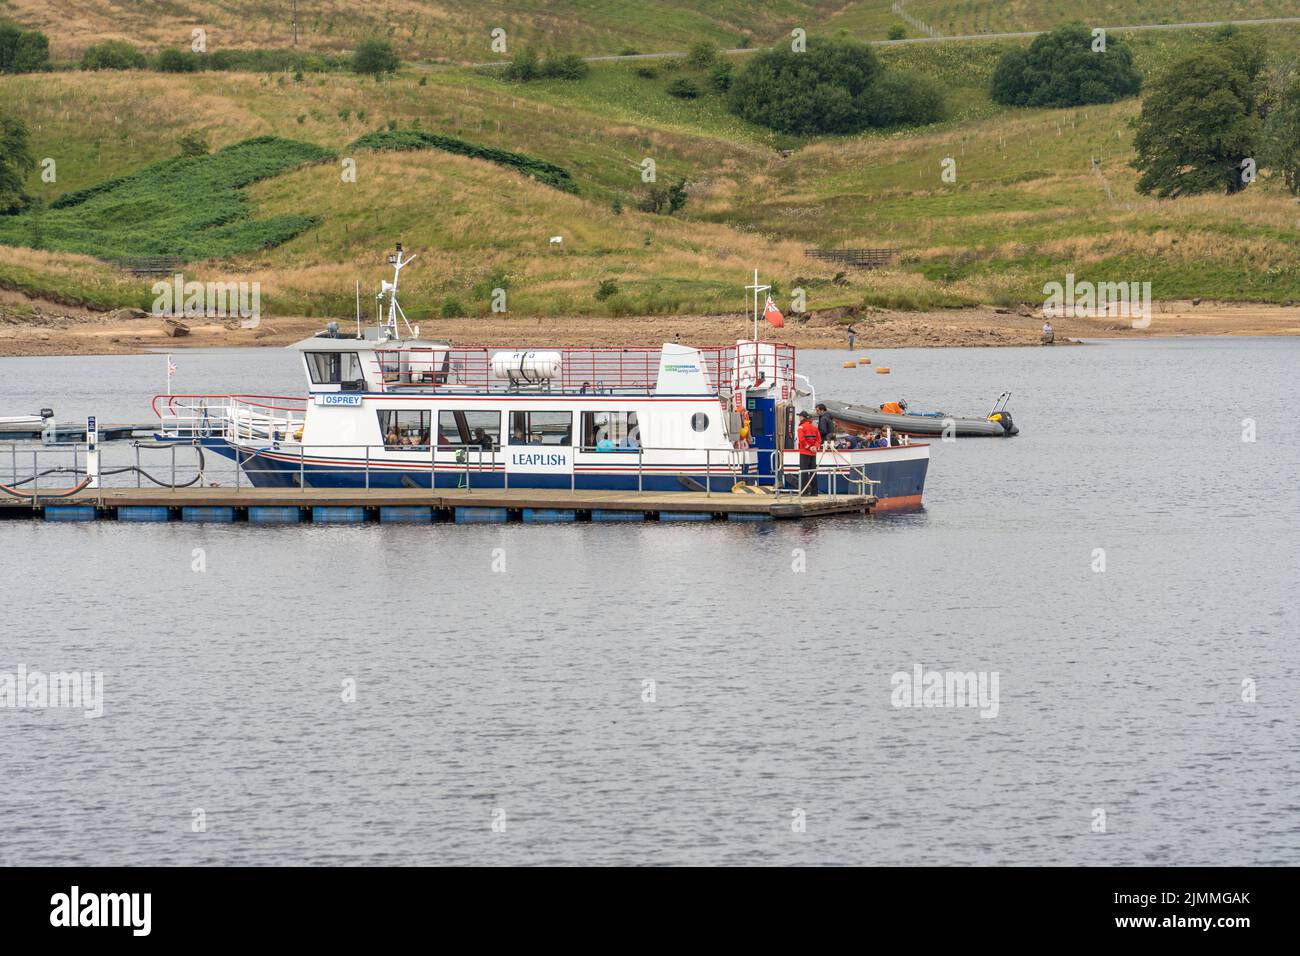 The Osprey ferry, departing Leaplish Waterside Park to view the resident osprey at Kielder Water reservoir, Northumberland, UK Stock Photo